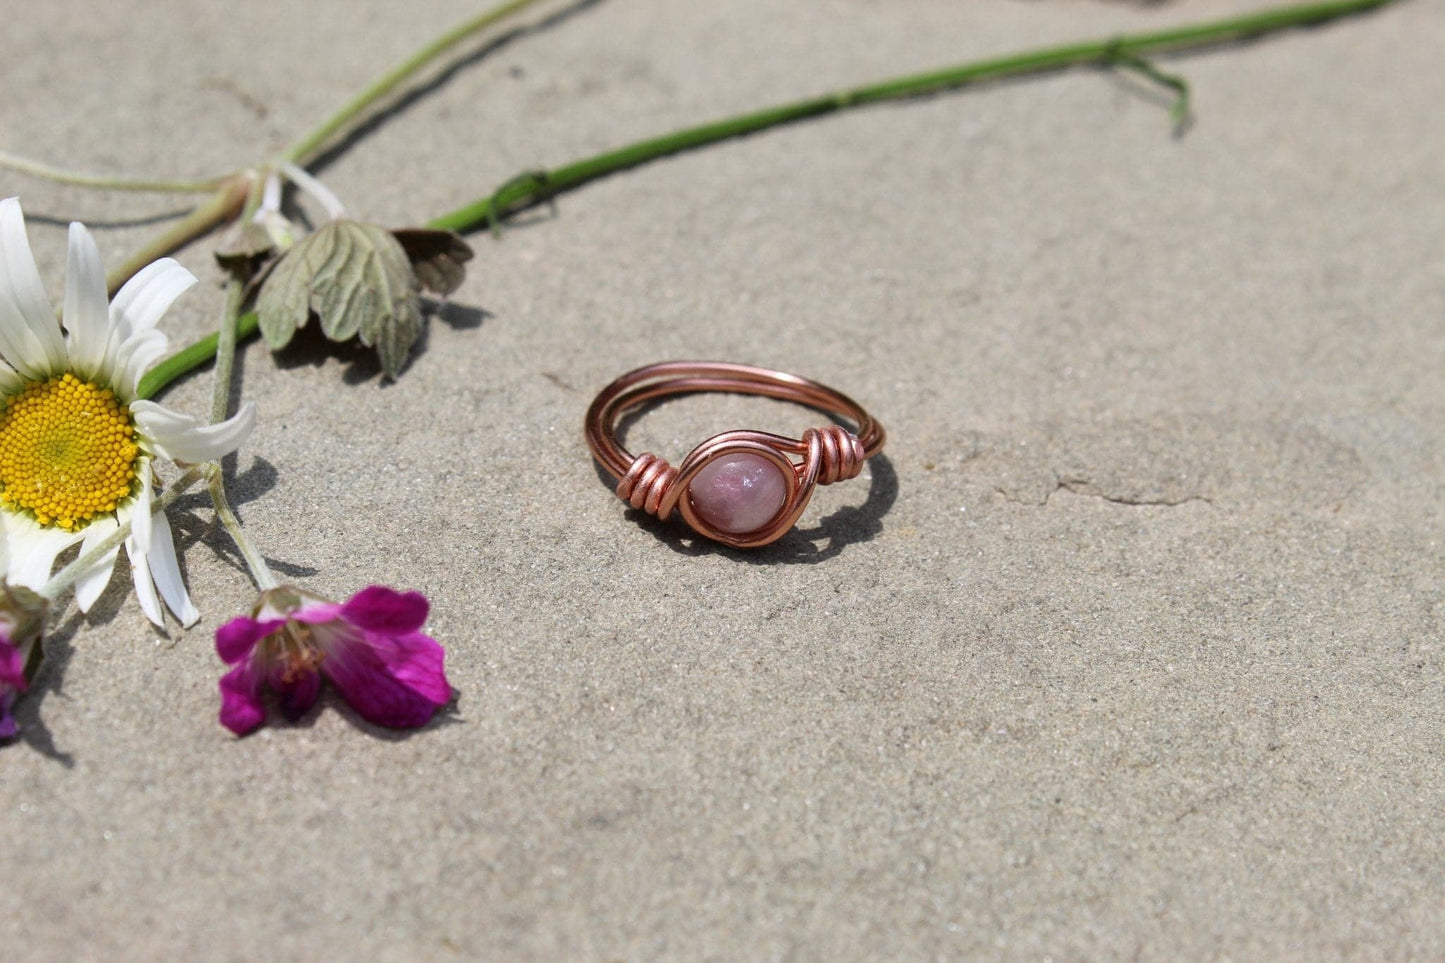 Lilac Lepidolite Wire Wrapped Ring - Aspden & Co Limited Liability Company